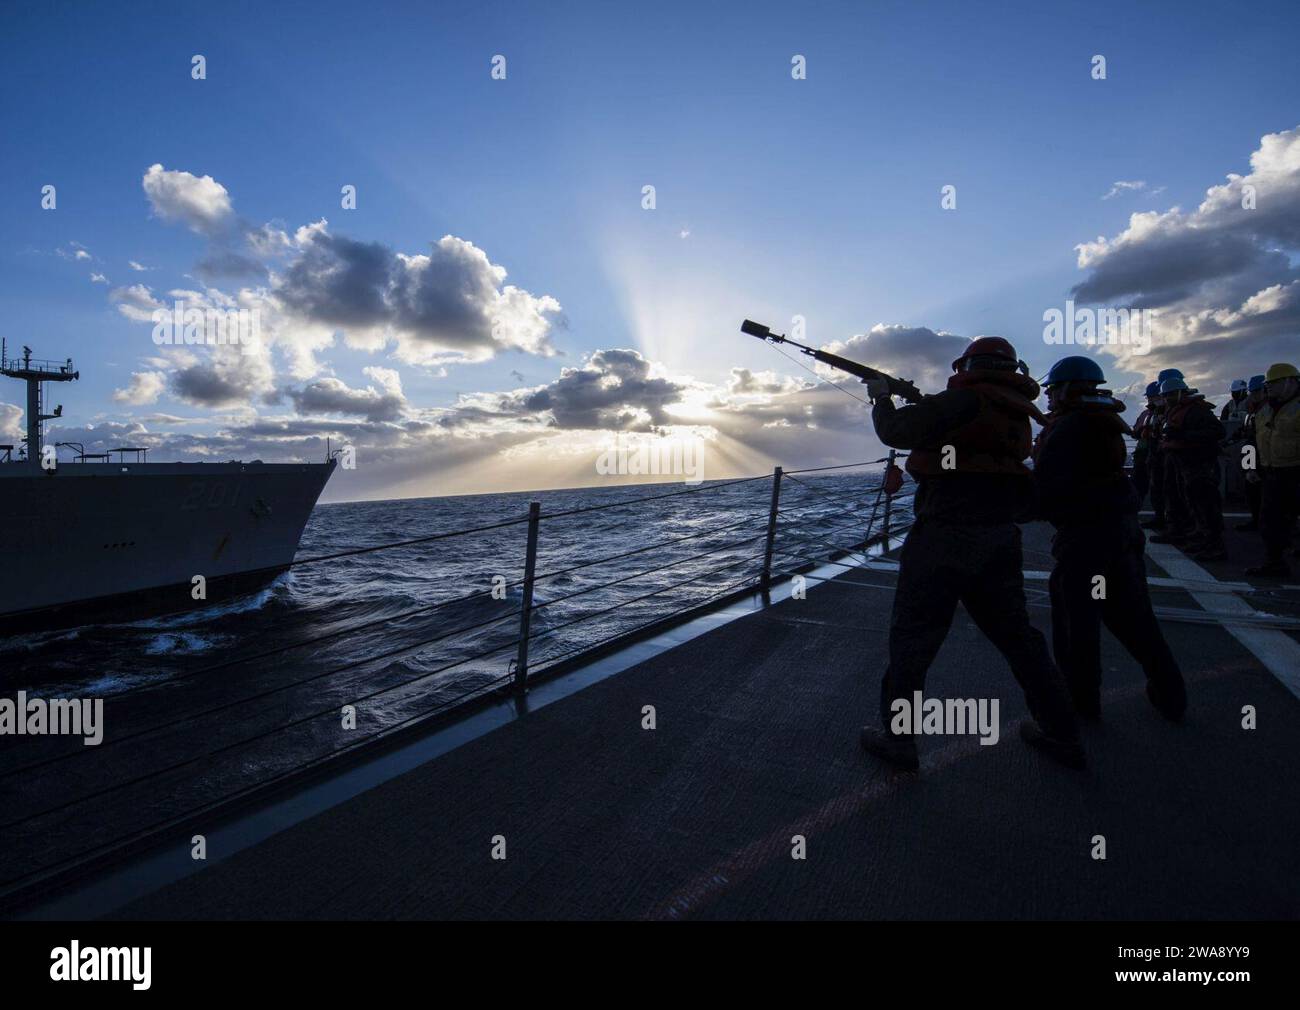 US military forces. 180103KA046-0140  AEGEAN SEA (Jan. 3, 2018) – Sailors aboard the Arleigh Burke-class guided-missile destroyer USS Carney (DDG 64) prepare to send shot lines to the fleet replenishment oiler USNS Patuxent (T-AO 201) during a replenishment-at-sea, Jan. 3, 2018. Carney, forward-deployed to Rota, Spain, is on its fourth patrol in the U.S. 6th Fleet area of operations in support of regional allies and partners, and U.S. national security interests in Europe. (U.S. Navy photo by Mass Communication Specialist 2nd Class James R. Turner/Released) Stock Photo